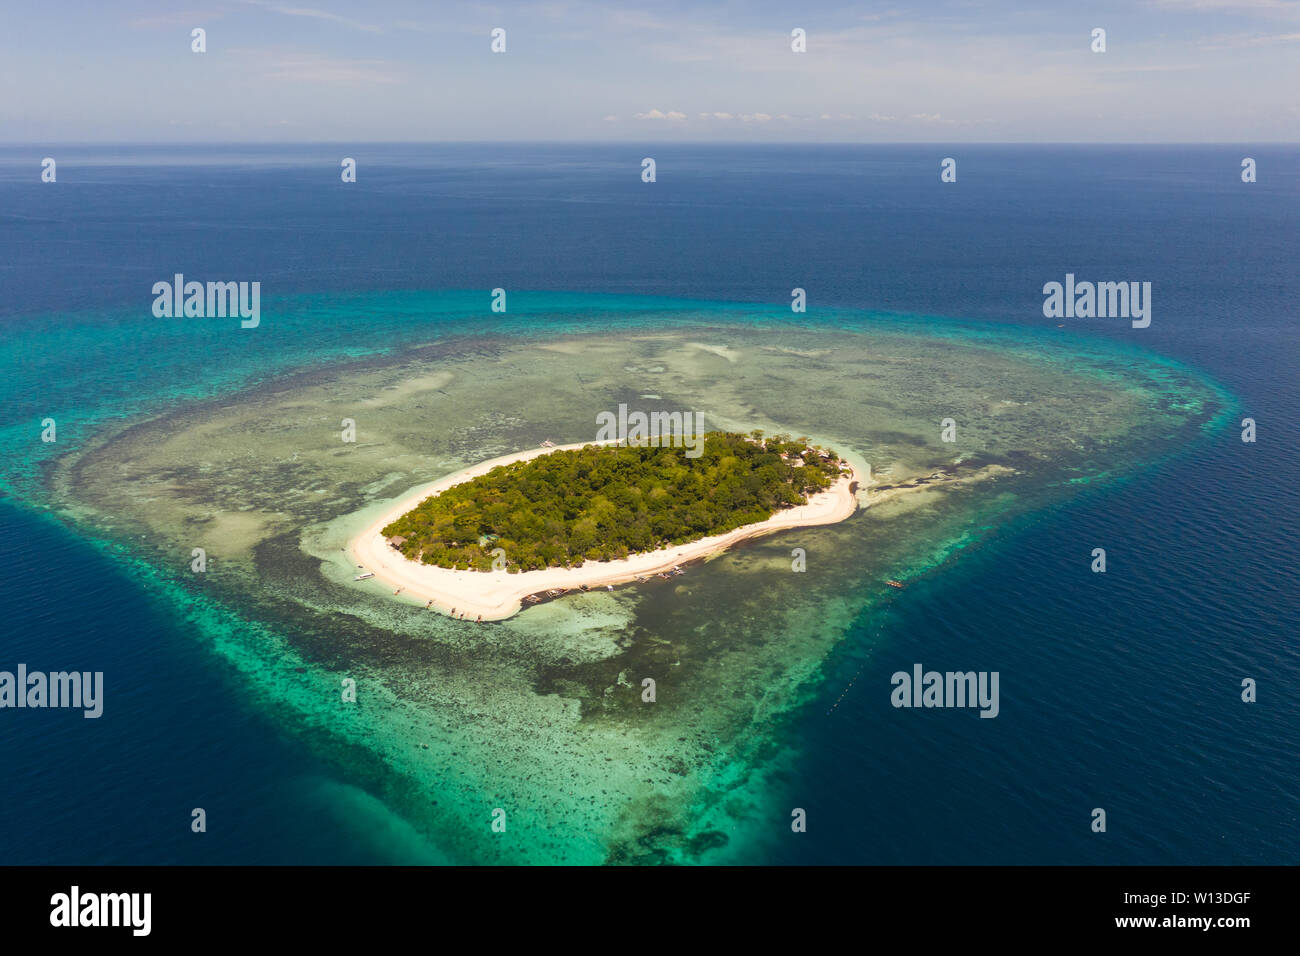 Mantigue Island, Philippines. Atoll with a tropical island. Round islet with a white beach and tropical trees, view from above. Stock Photo